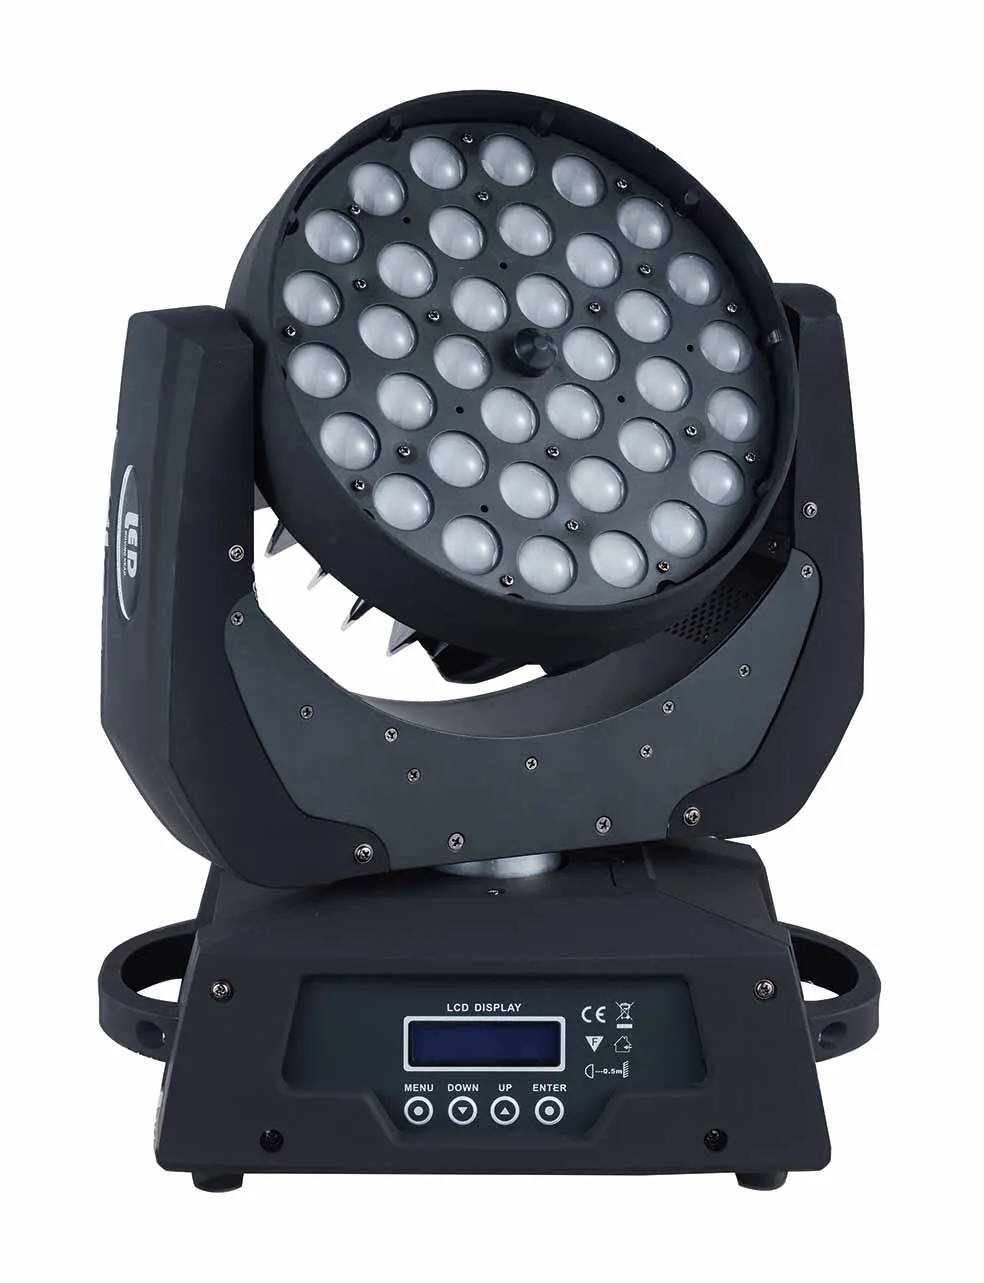 

Cheap stage light Lyre 36x10W rgbw 4 in 1 led zoom moving head wash disco light with circle control dj stage party show dmx512